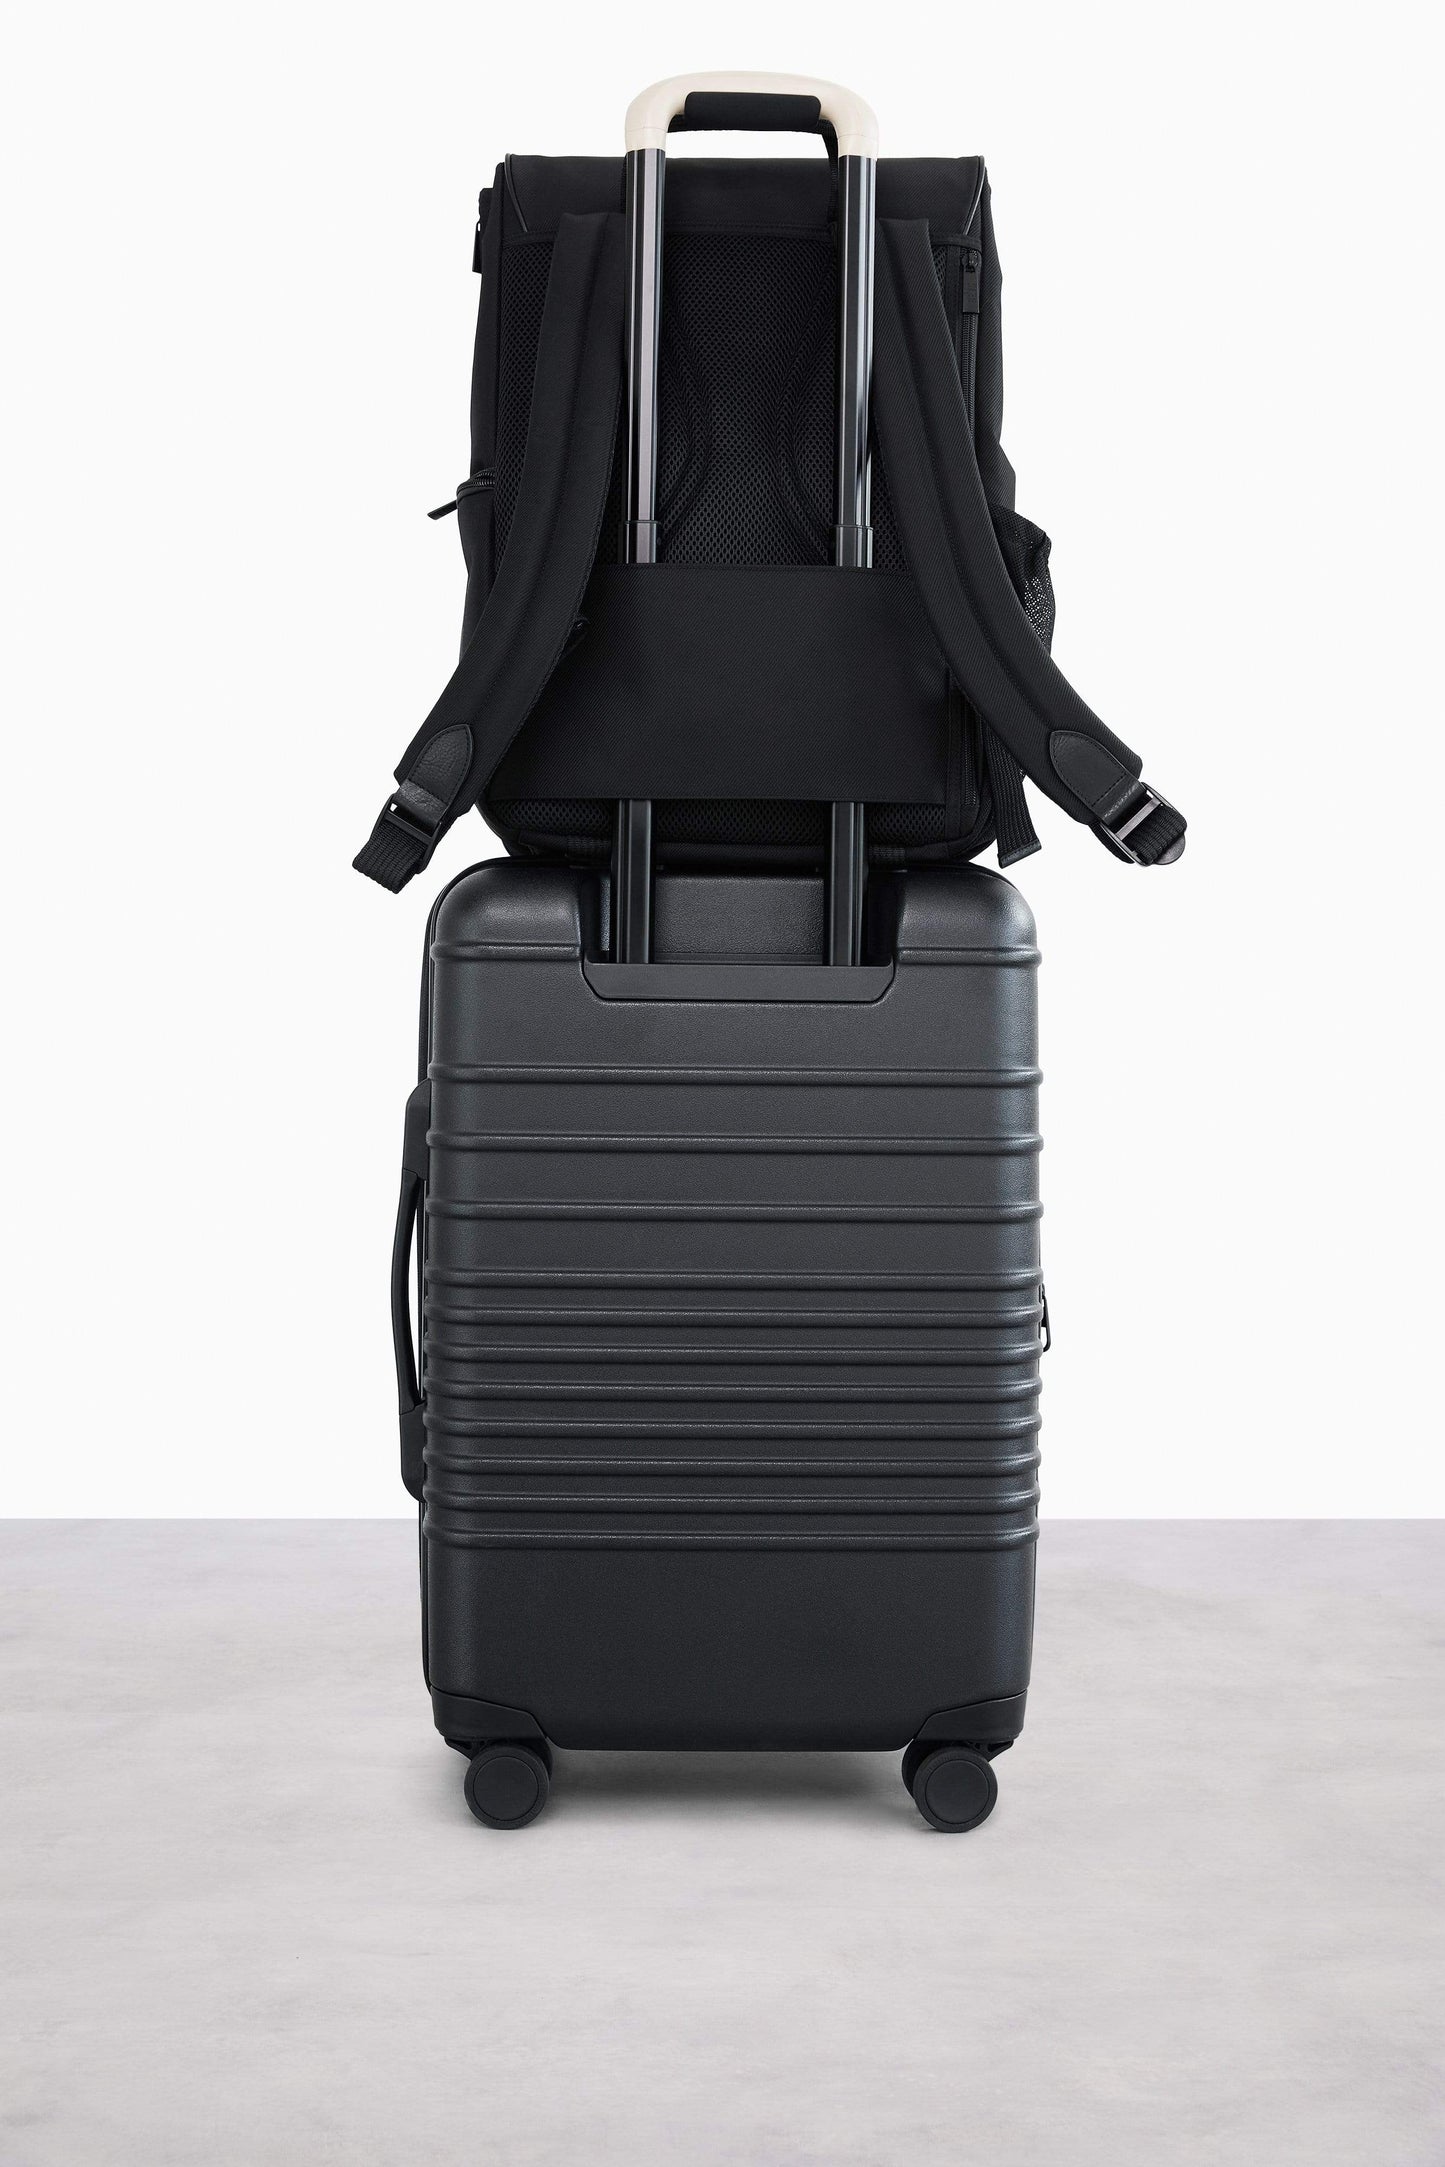 Hanging Backpack in Black Trolley Passthrough on Luggage